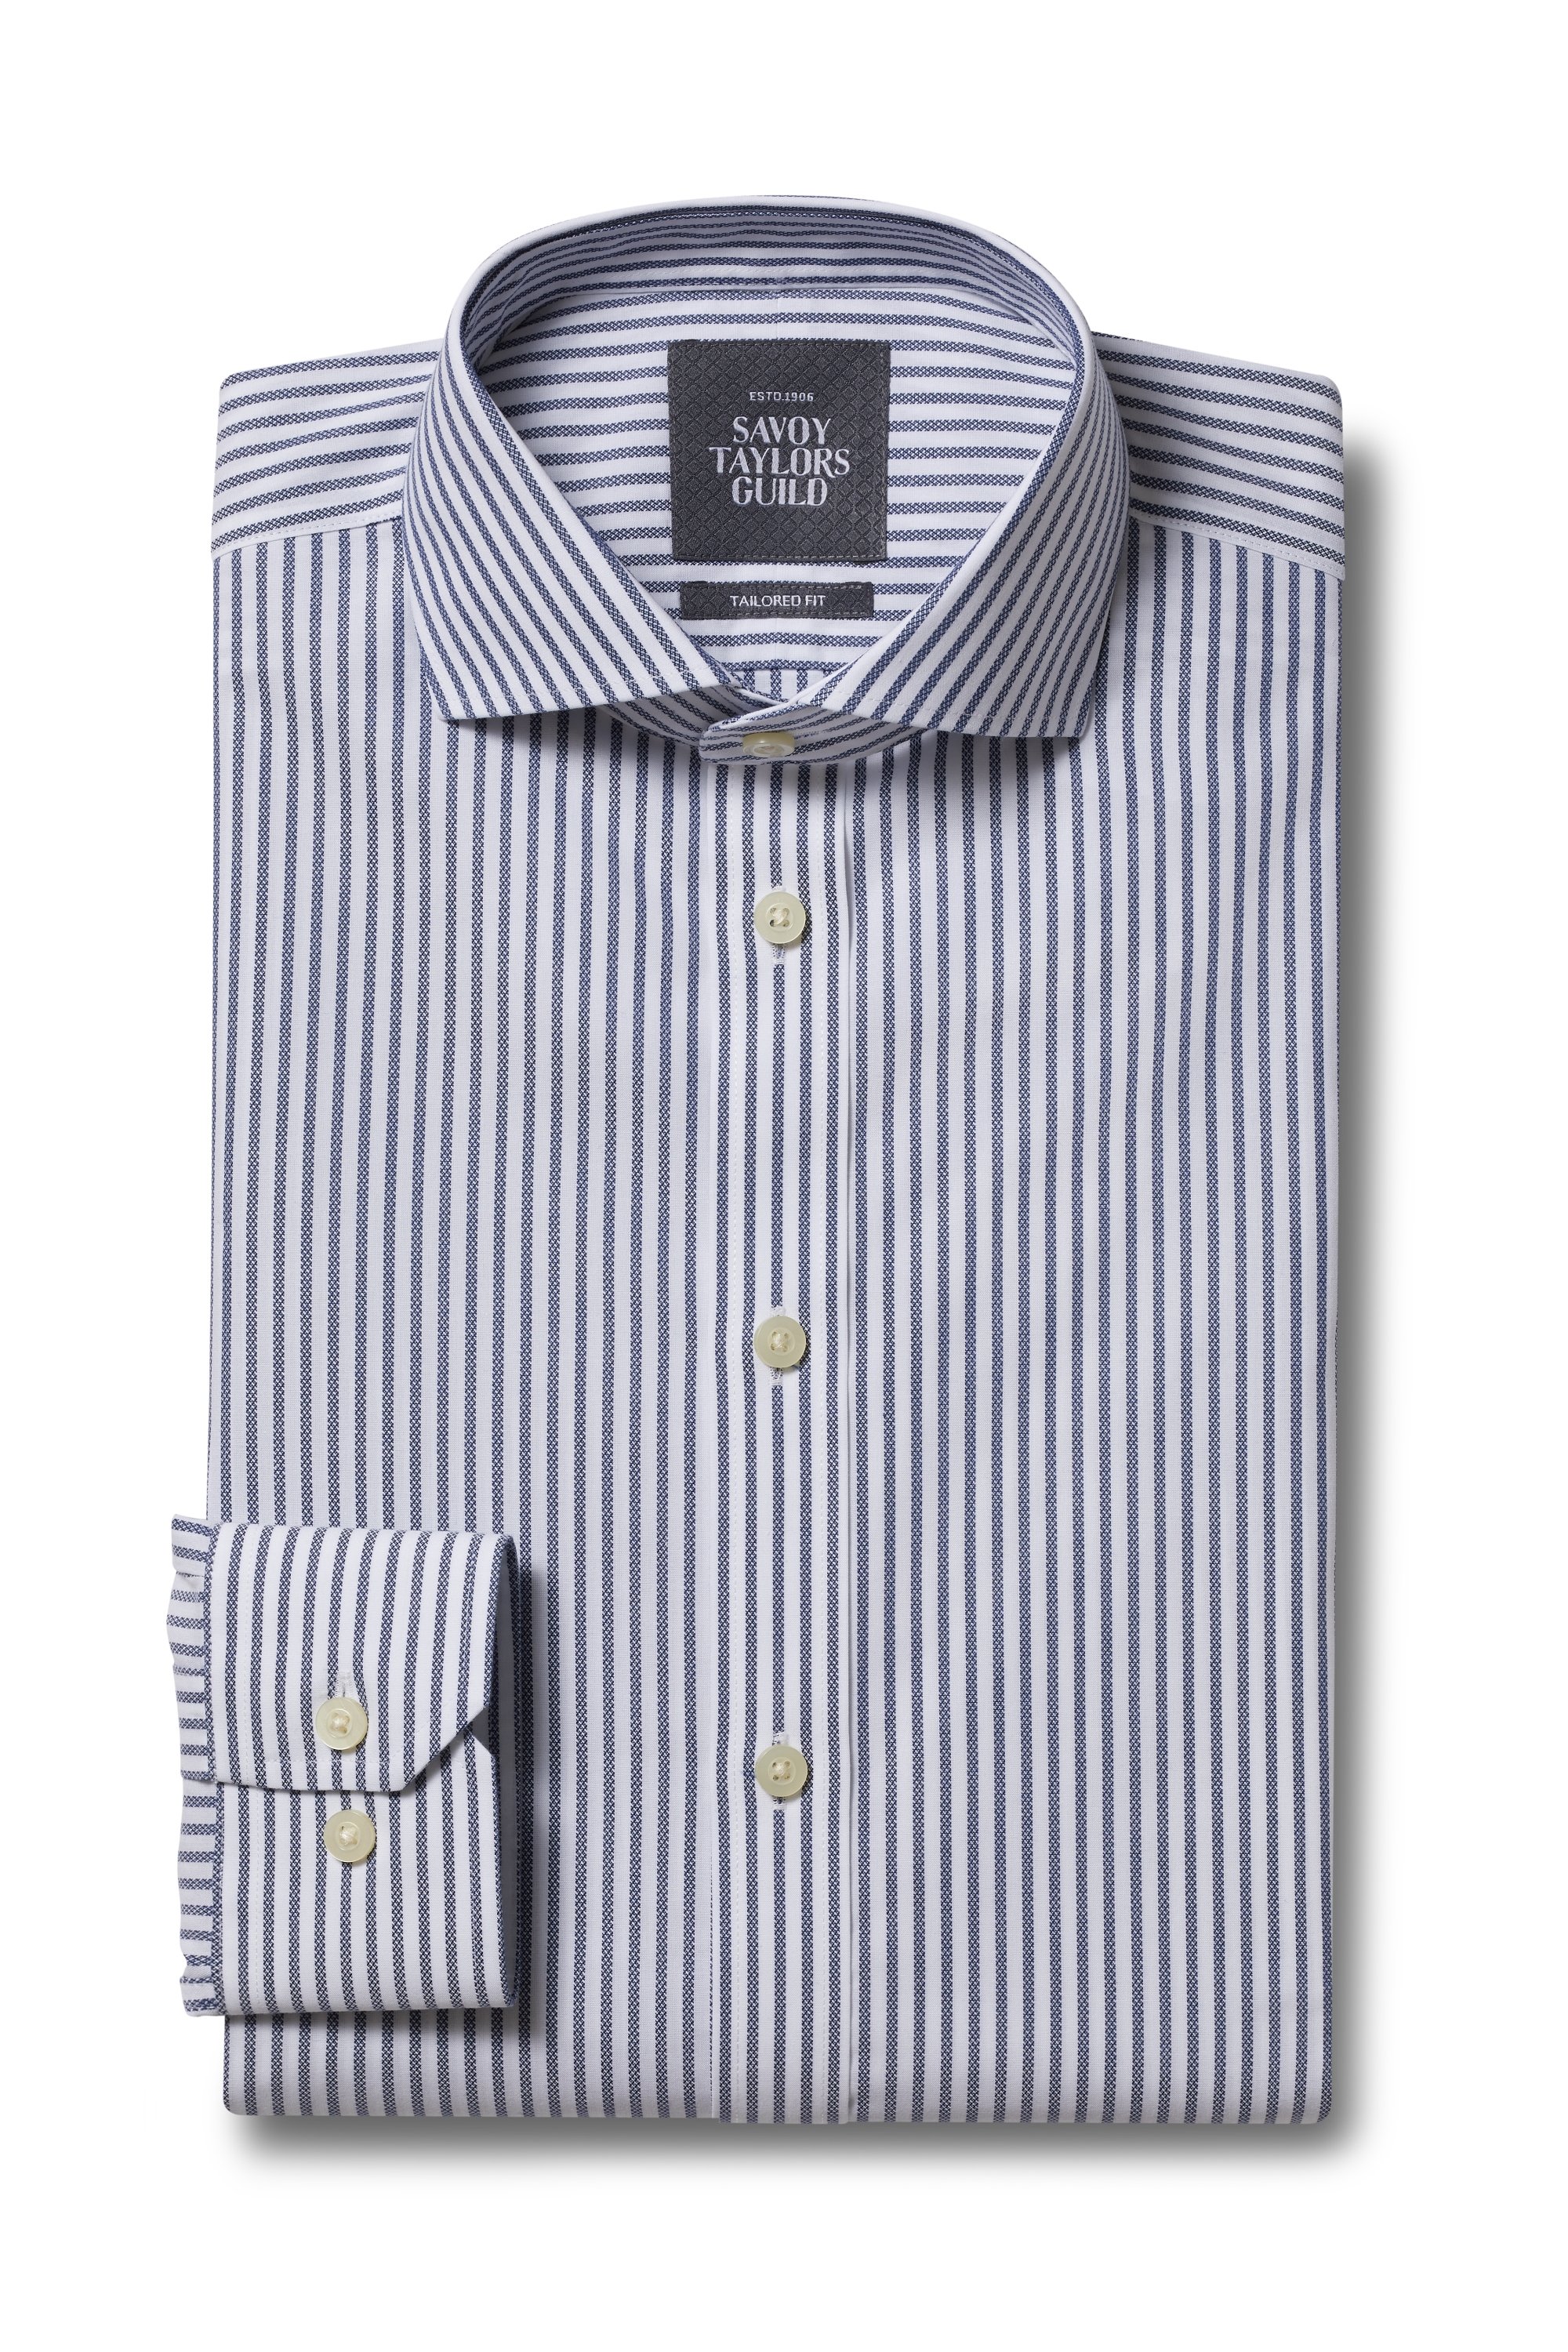 Savoy Taylors Guild Tailored Fit Blue Single Cuff Textured Stripe Non ...